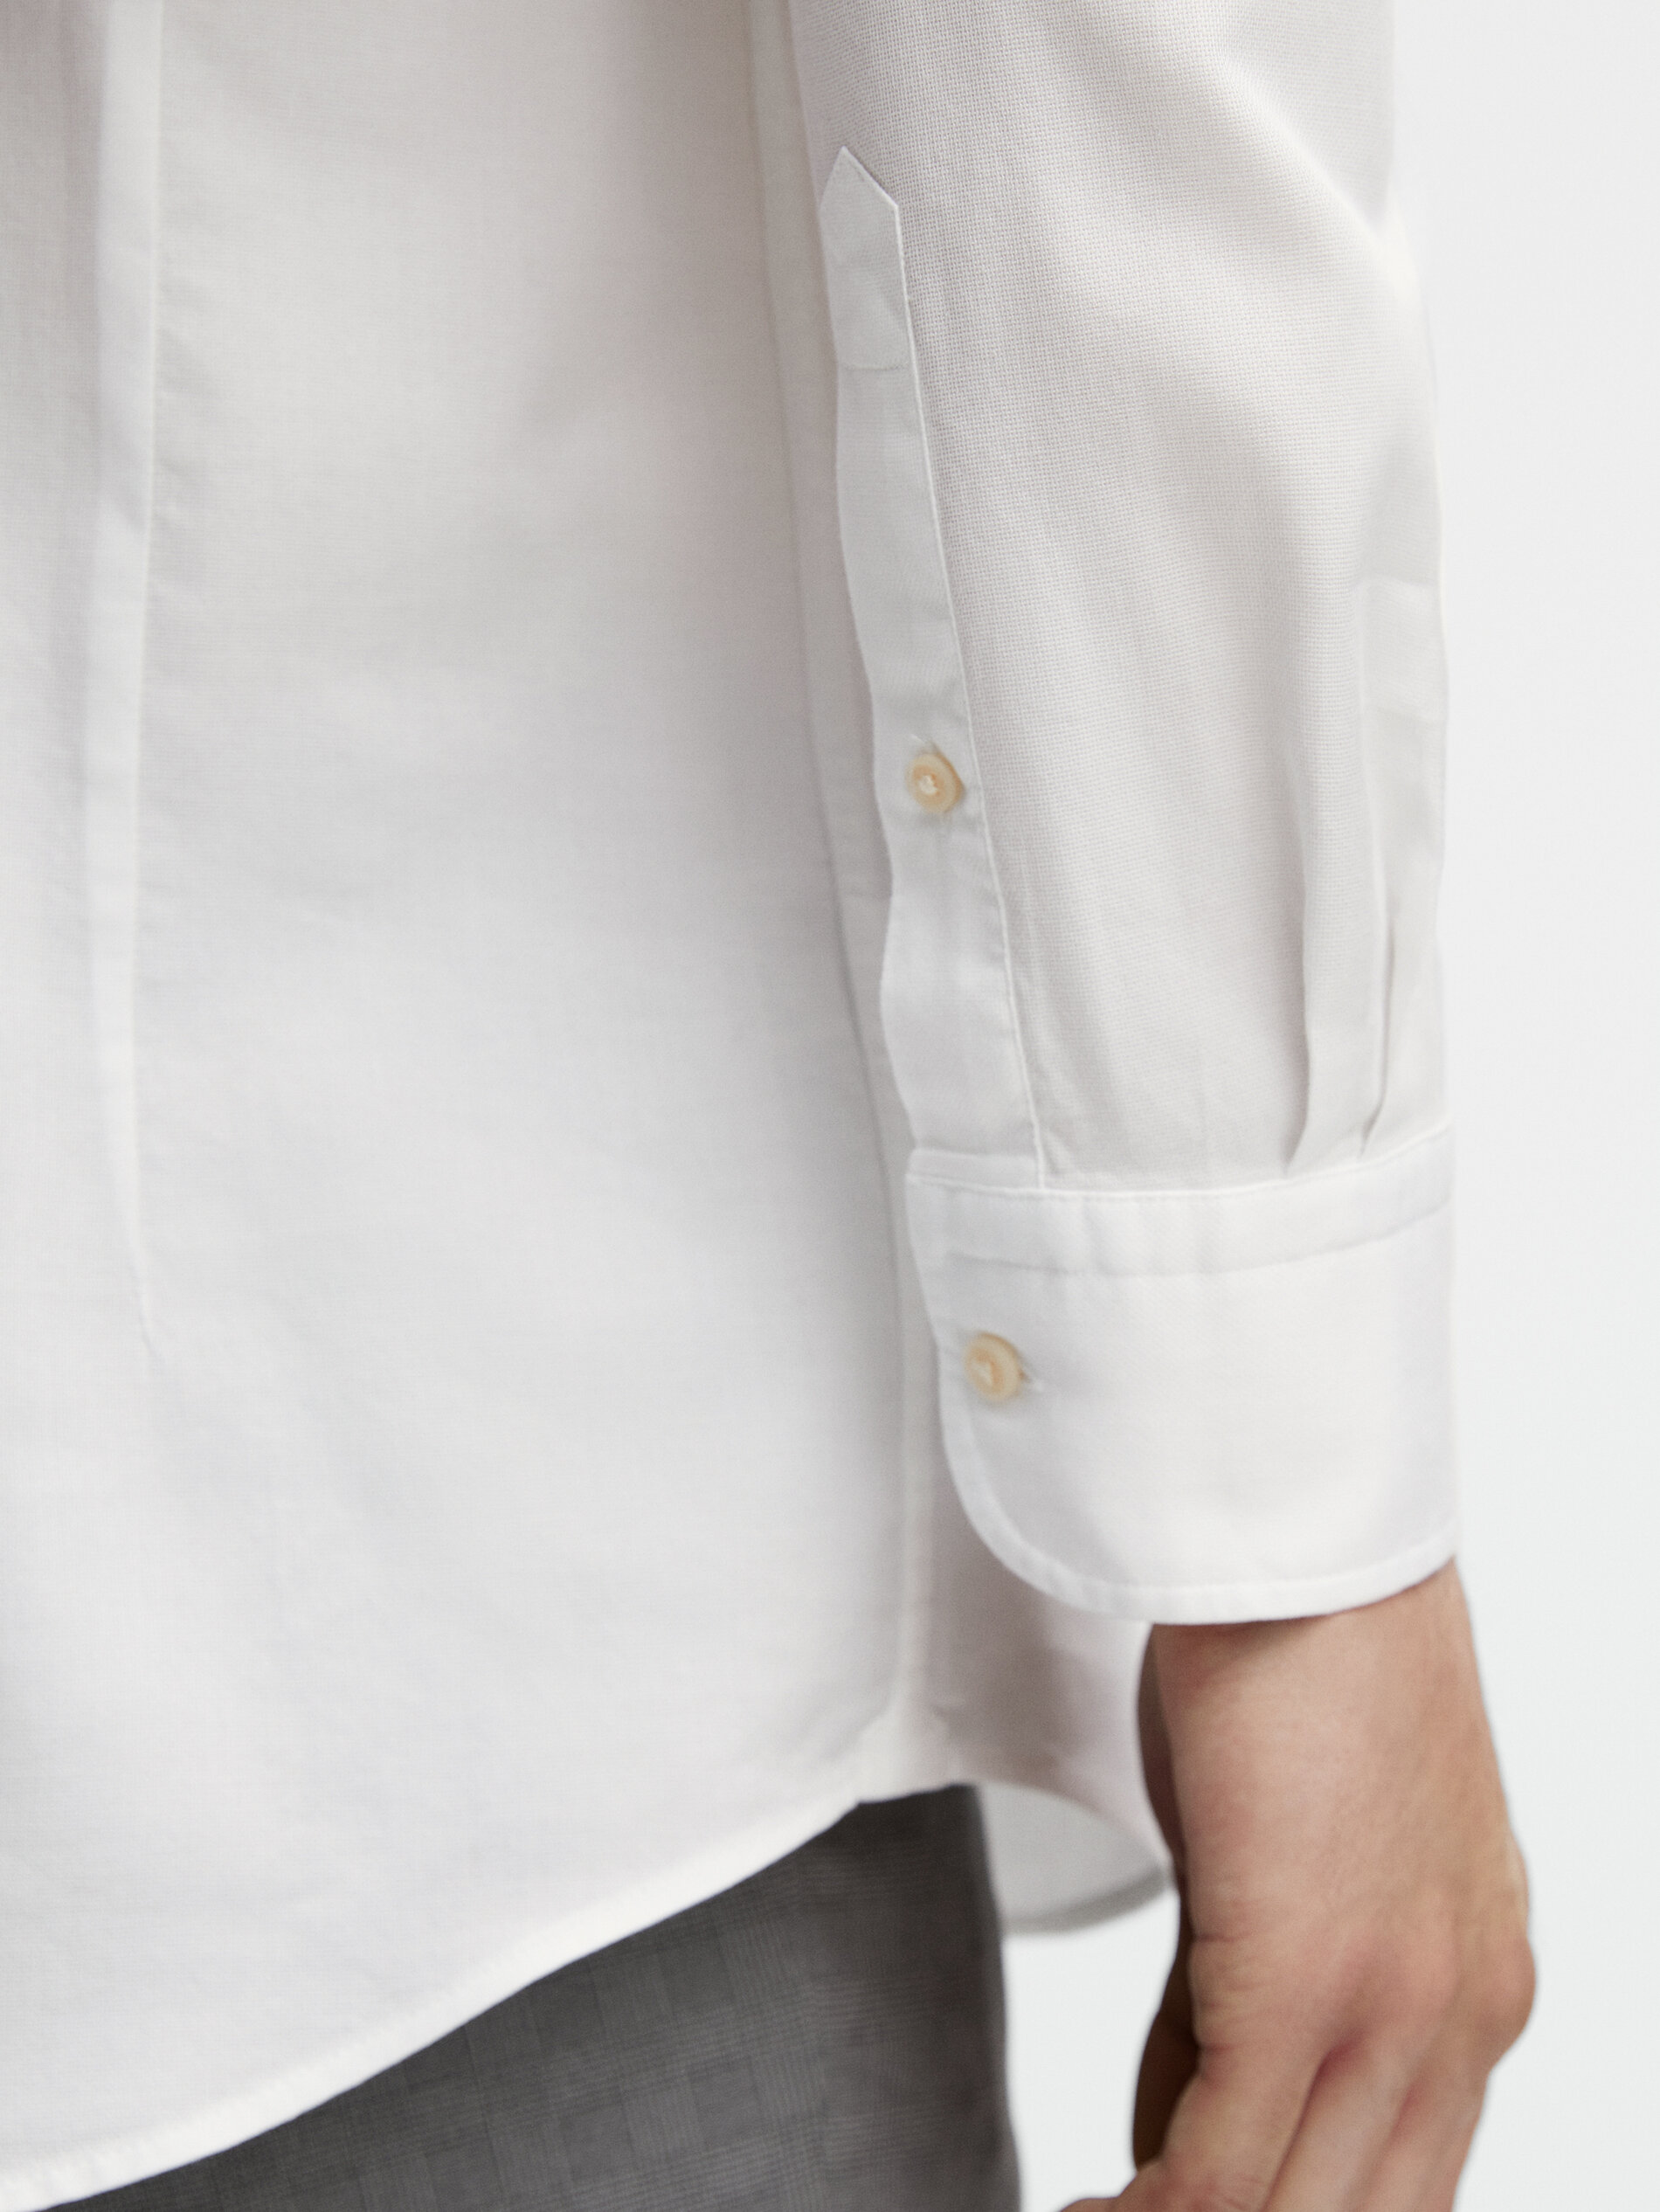 Slim fit faded cotton shirt